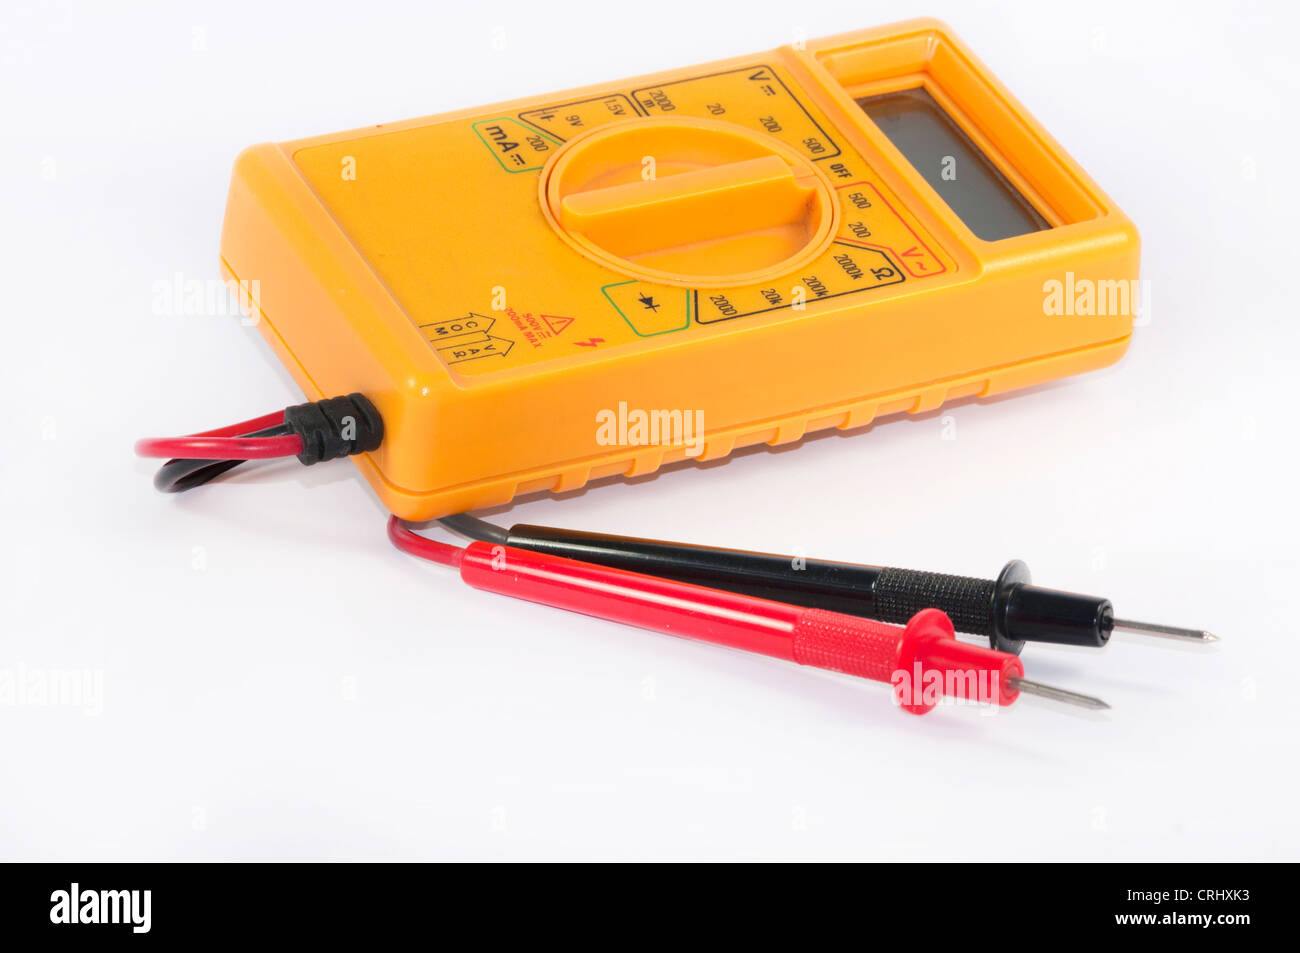 tool for electricity measurement Stock Photo